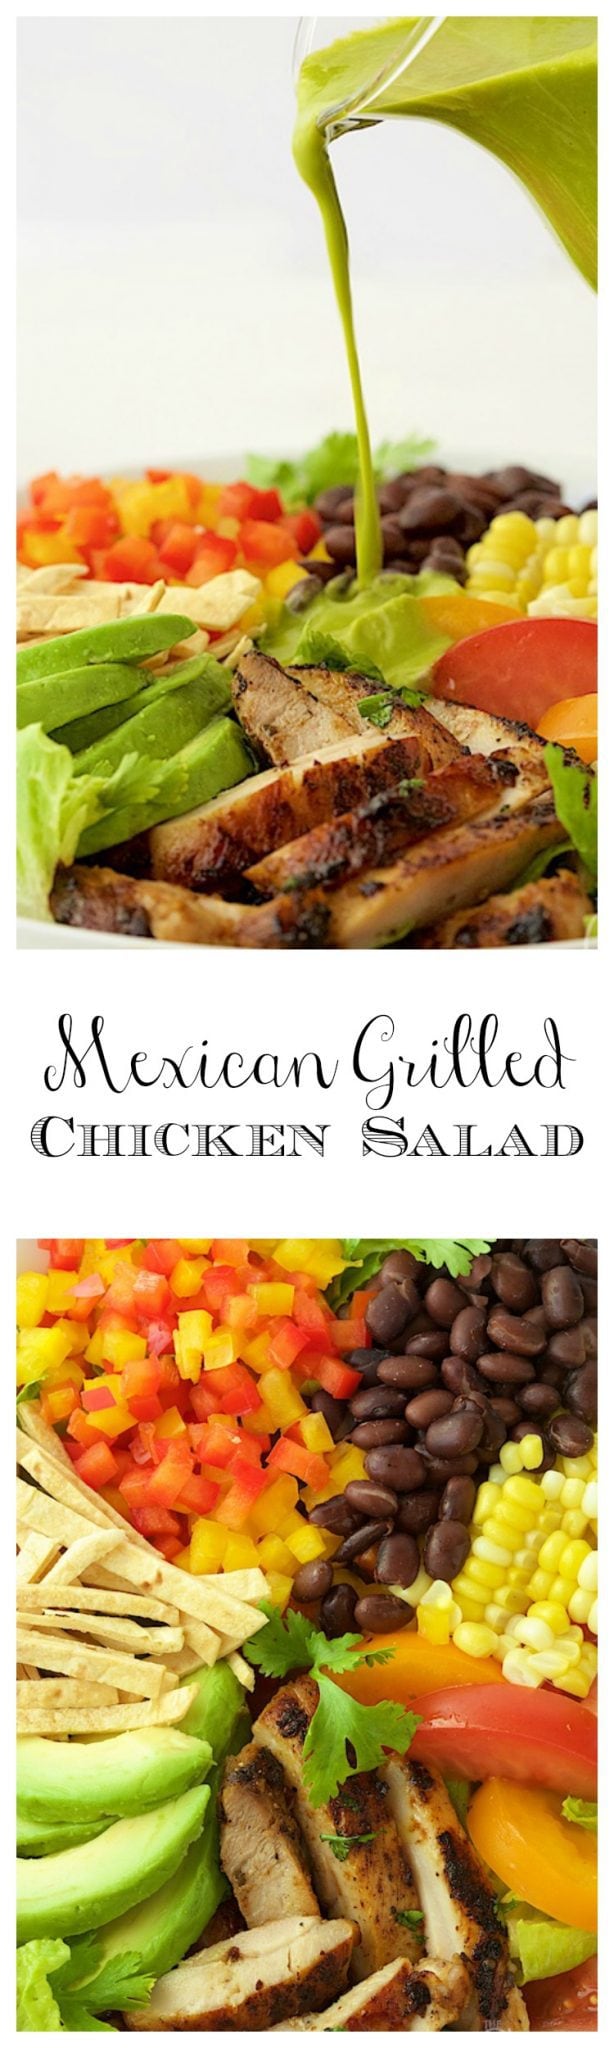 Mexican Grilled Chicken Salad - this fresh salad bursting with south-of -the-border flavor is a great way to keep meals healthy and delicious!